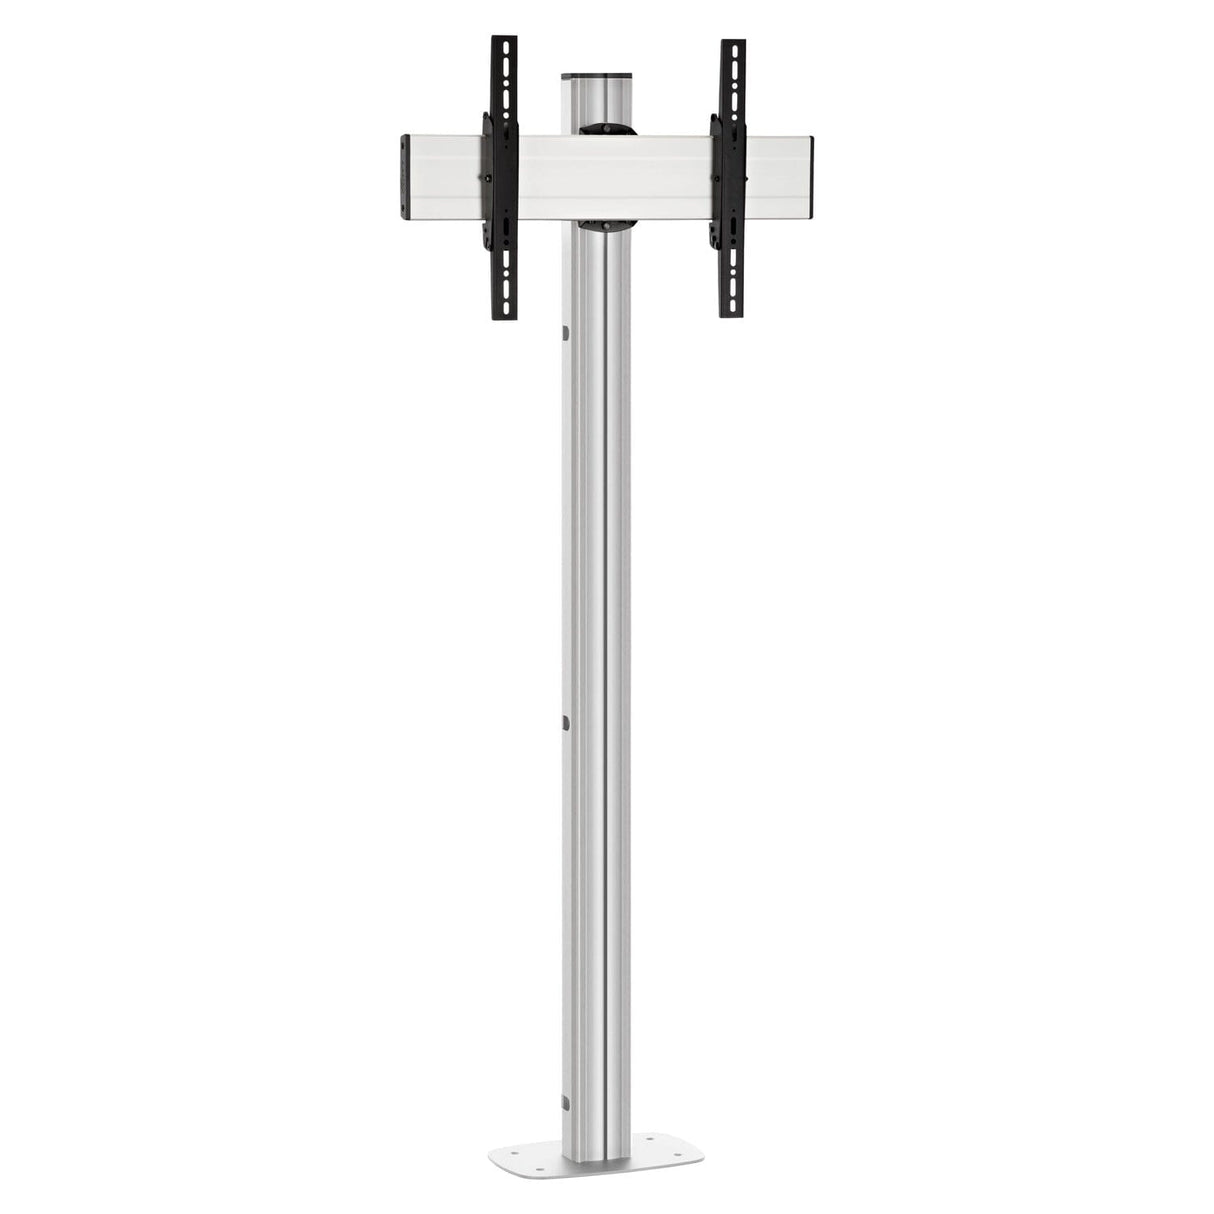 Vogels FM1544 Single Pole Fixed to Floor Stand For up to 65" TVs